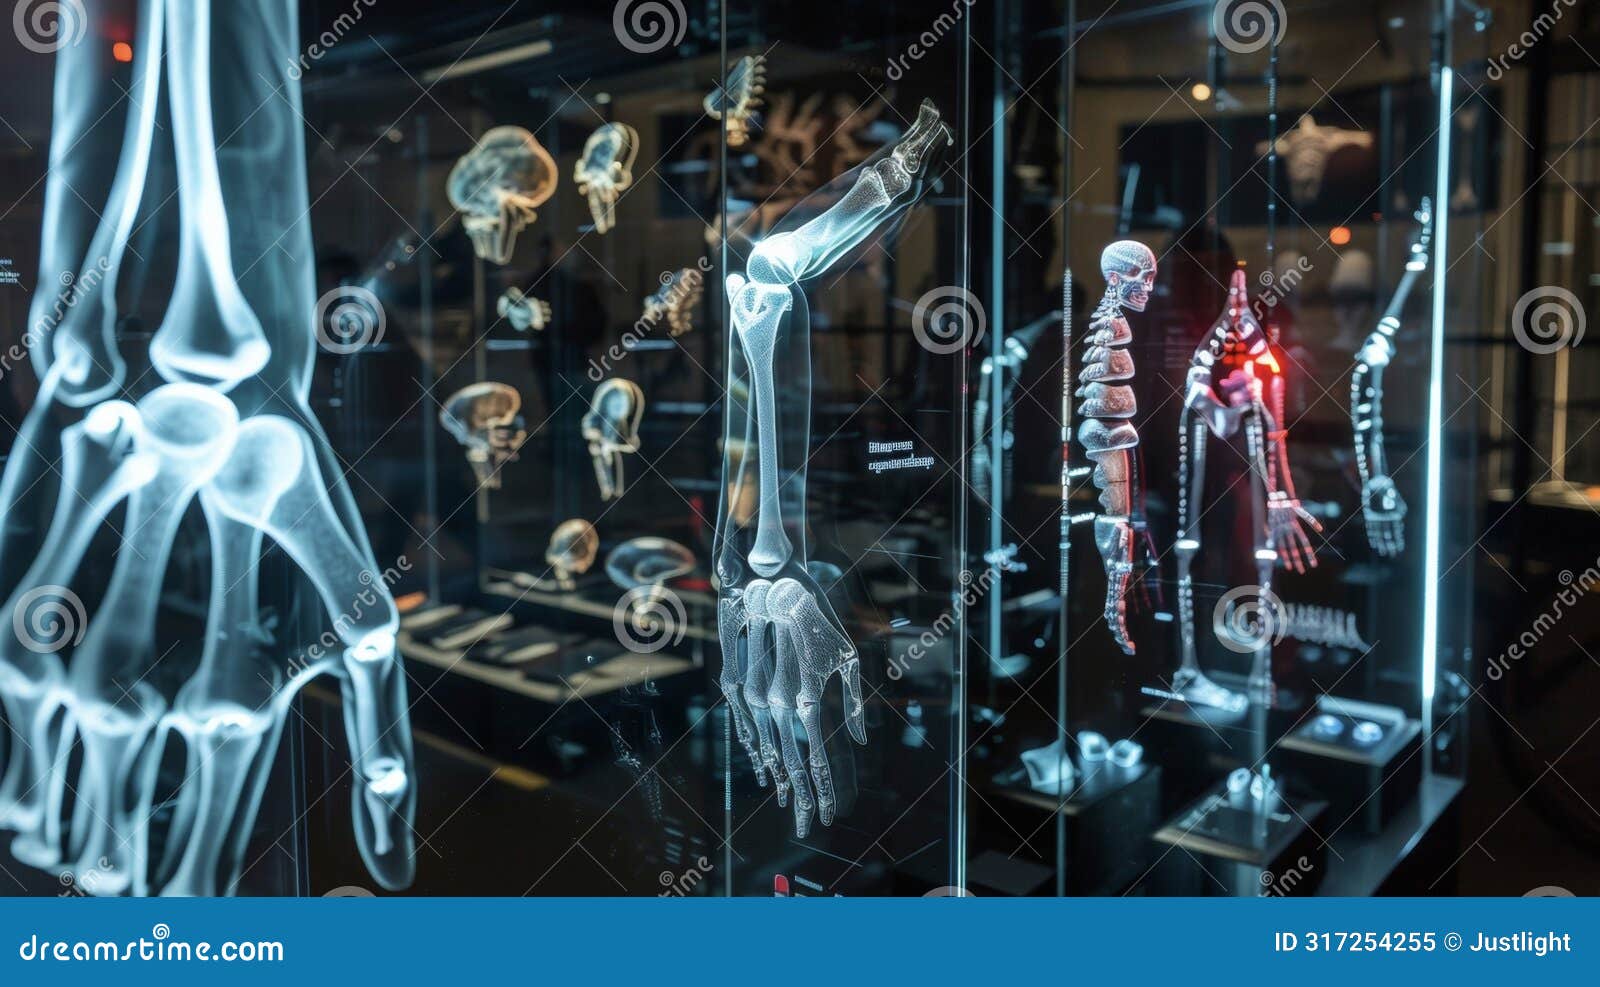 augmented reality projections showing the internal mechanics and functions of different types of prosthetic limbs aiding